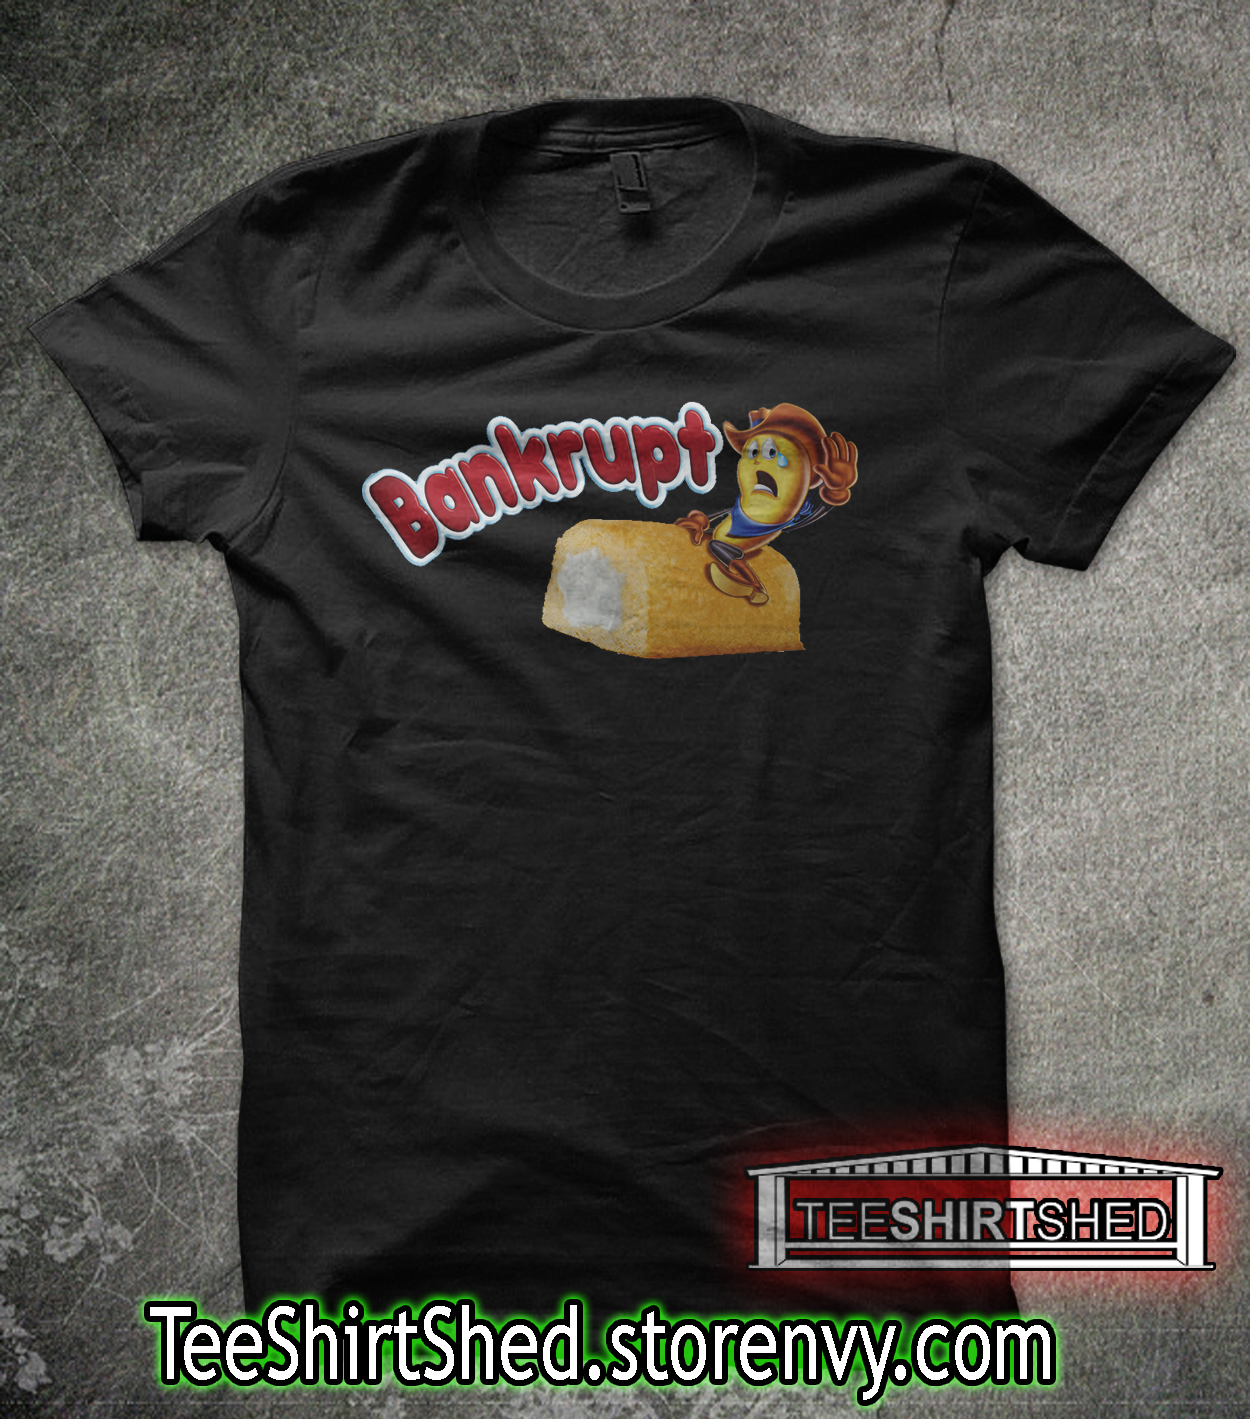 Awesome Shirt to say goodbye to Twinkies!